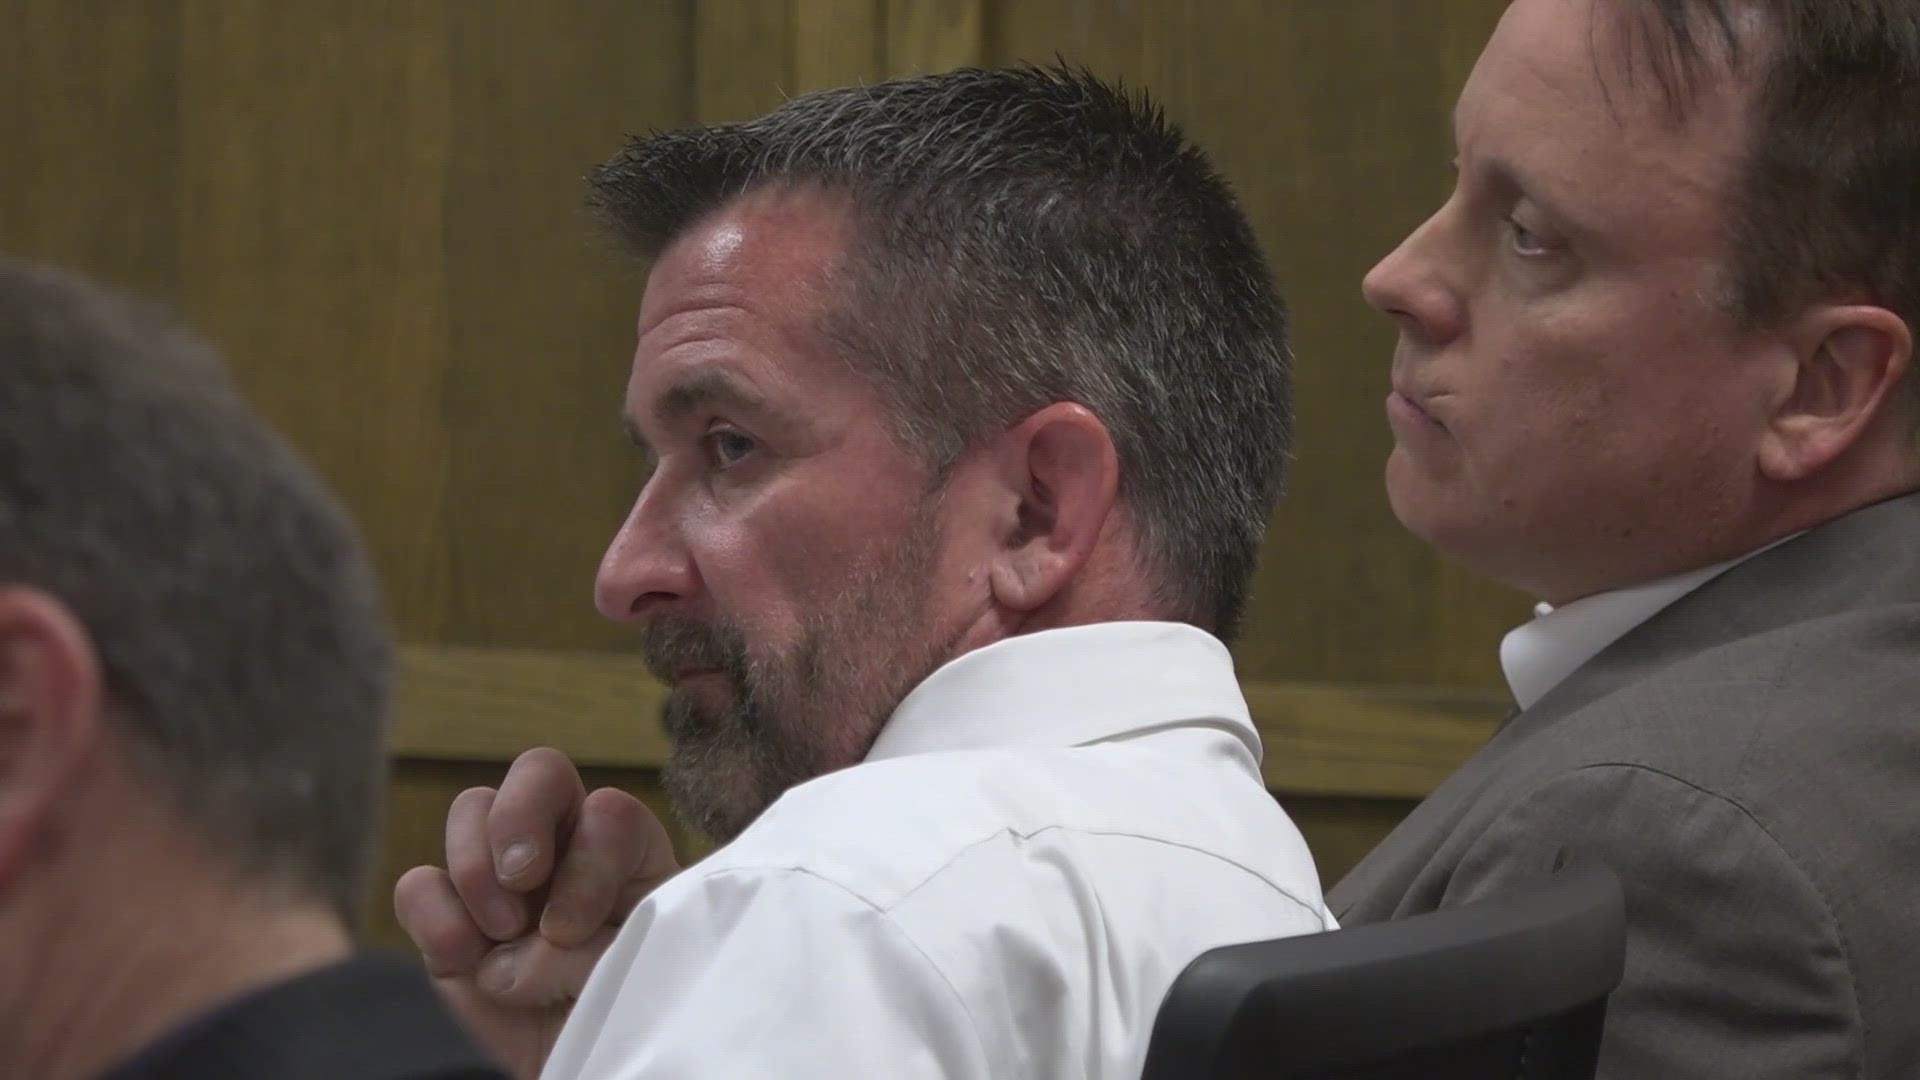 Ryser is found guilty of hitting a biker with a tow truck in 2020.